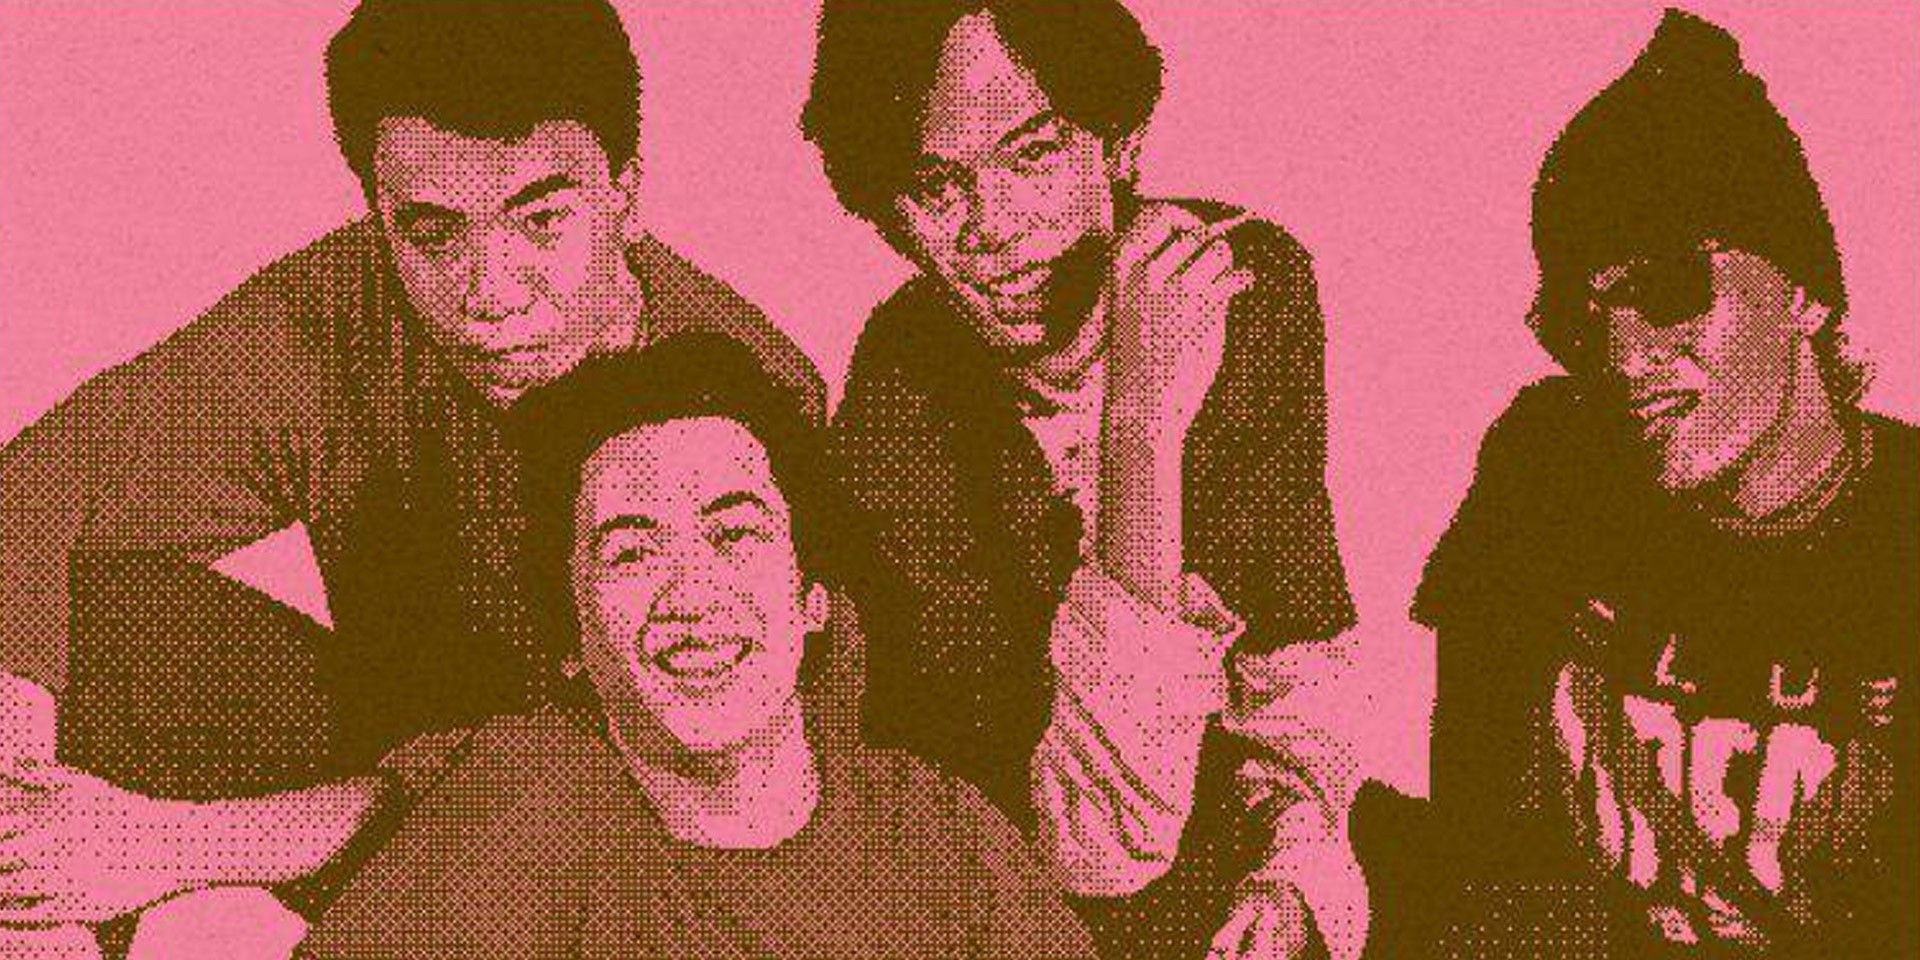 Eraserheads to launch Ultraelectromagneticpop! anniversary merch